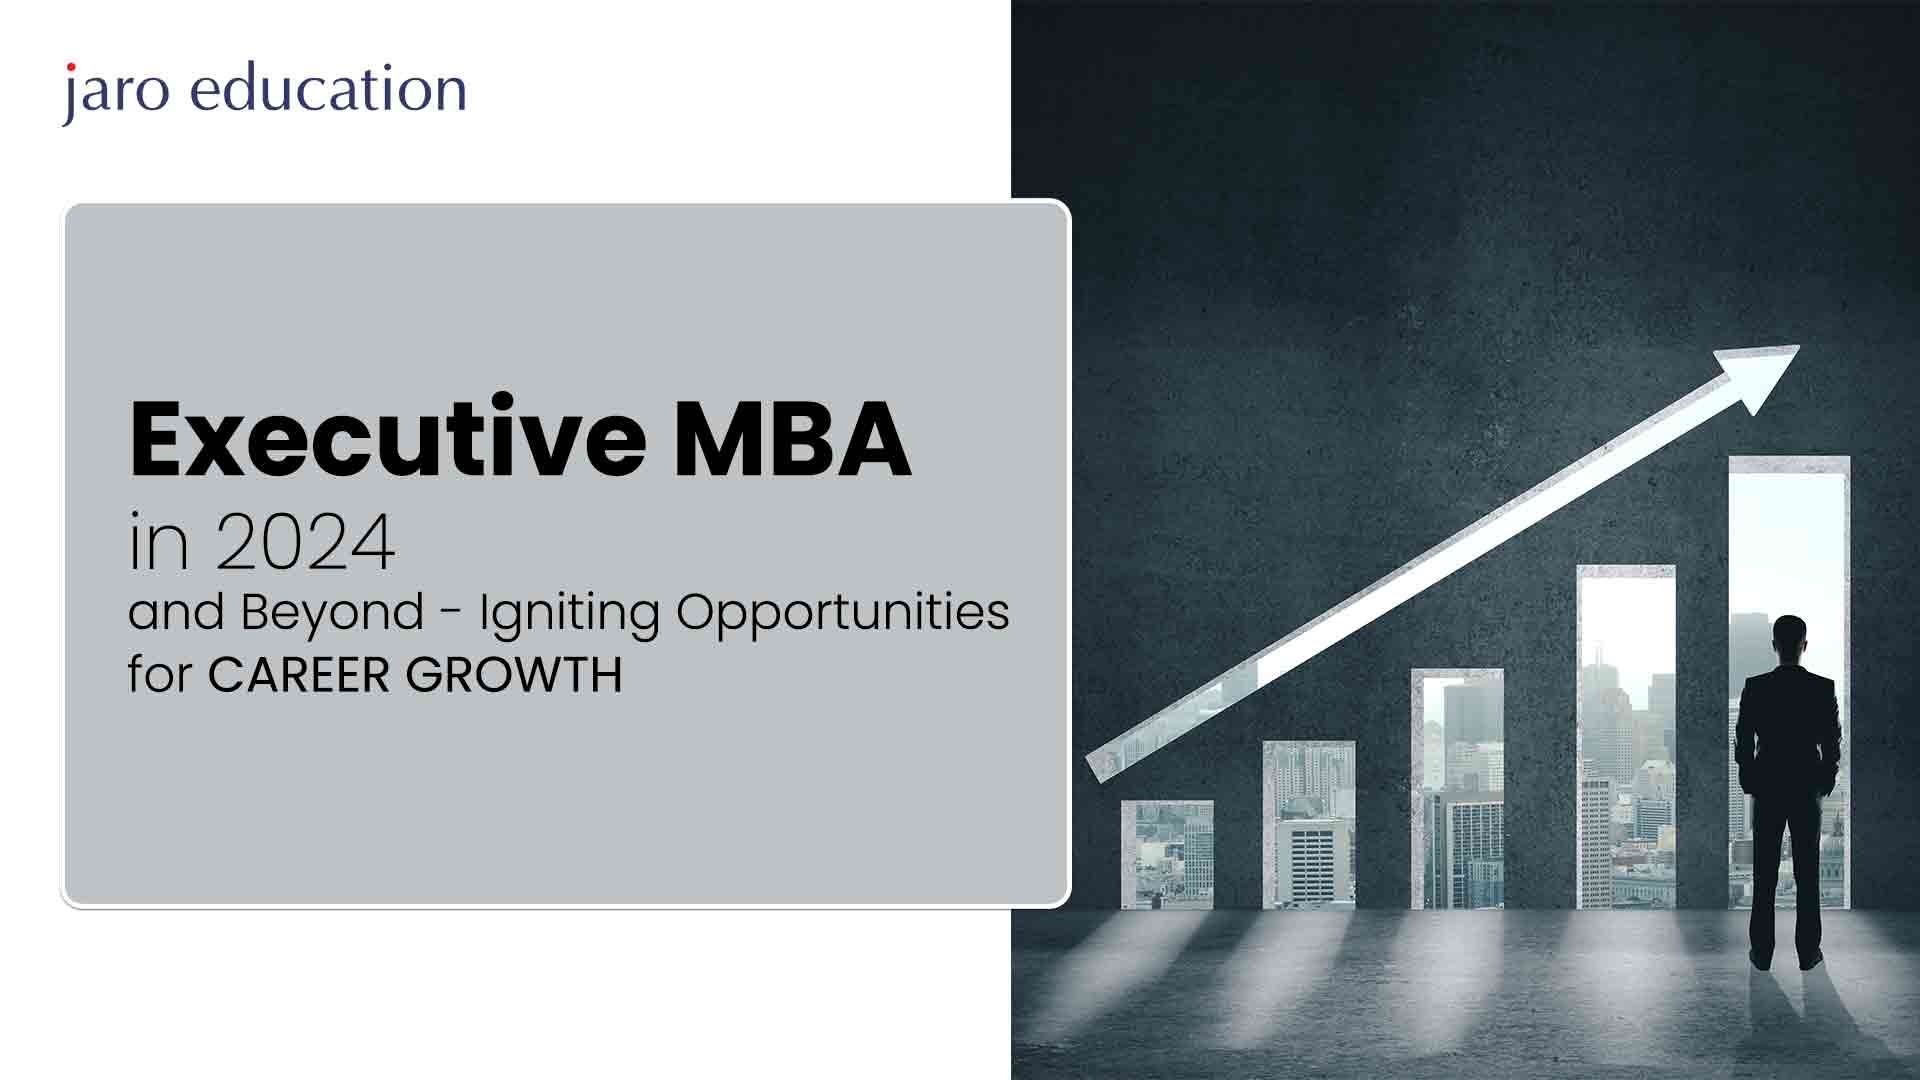 Executive MBA in 2024 and Beyond Igniting Opportunities for Career Growth